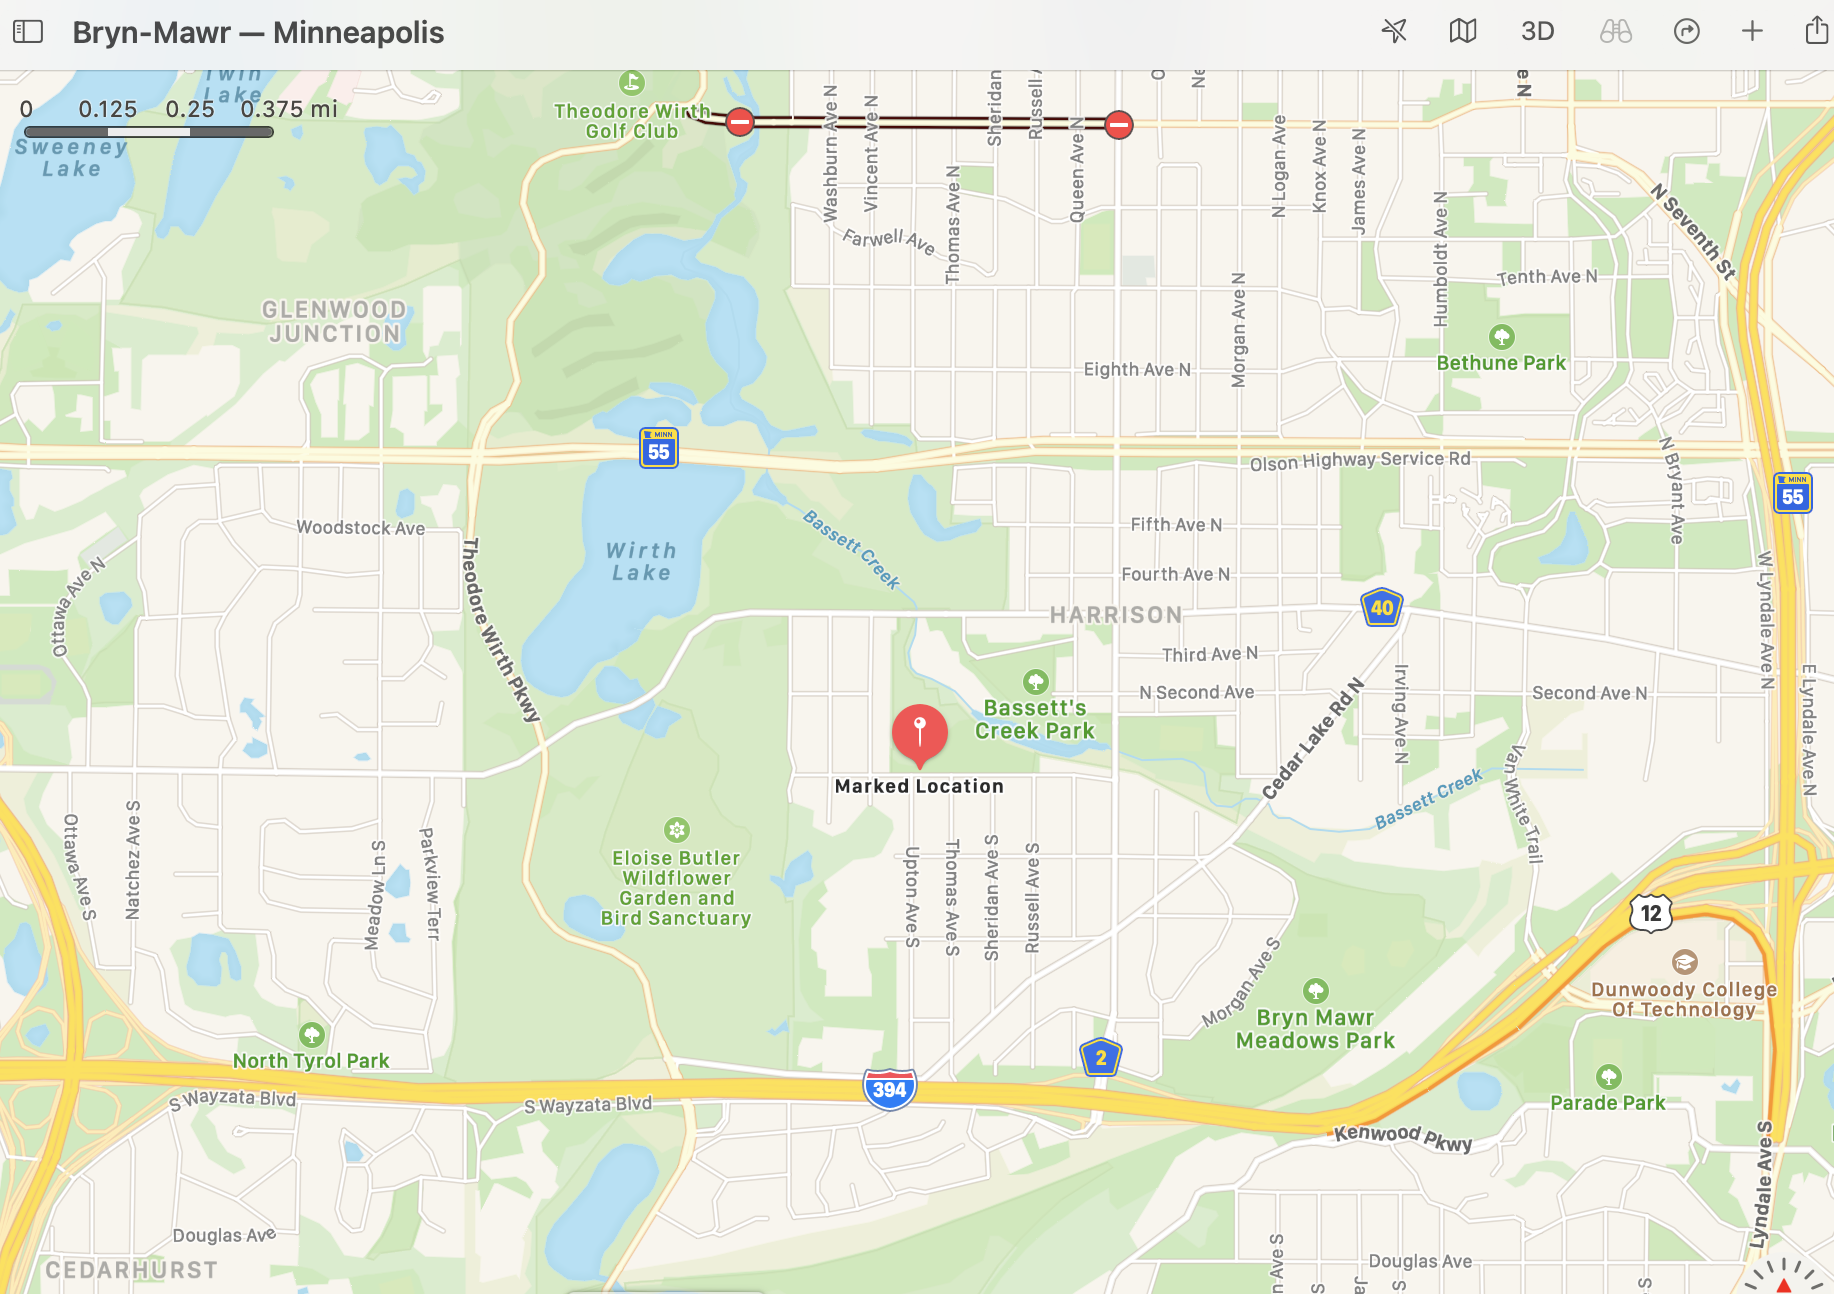 A map of the meeting location at Bassett's Creek Park